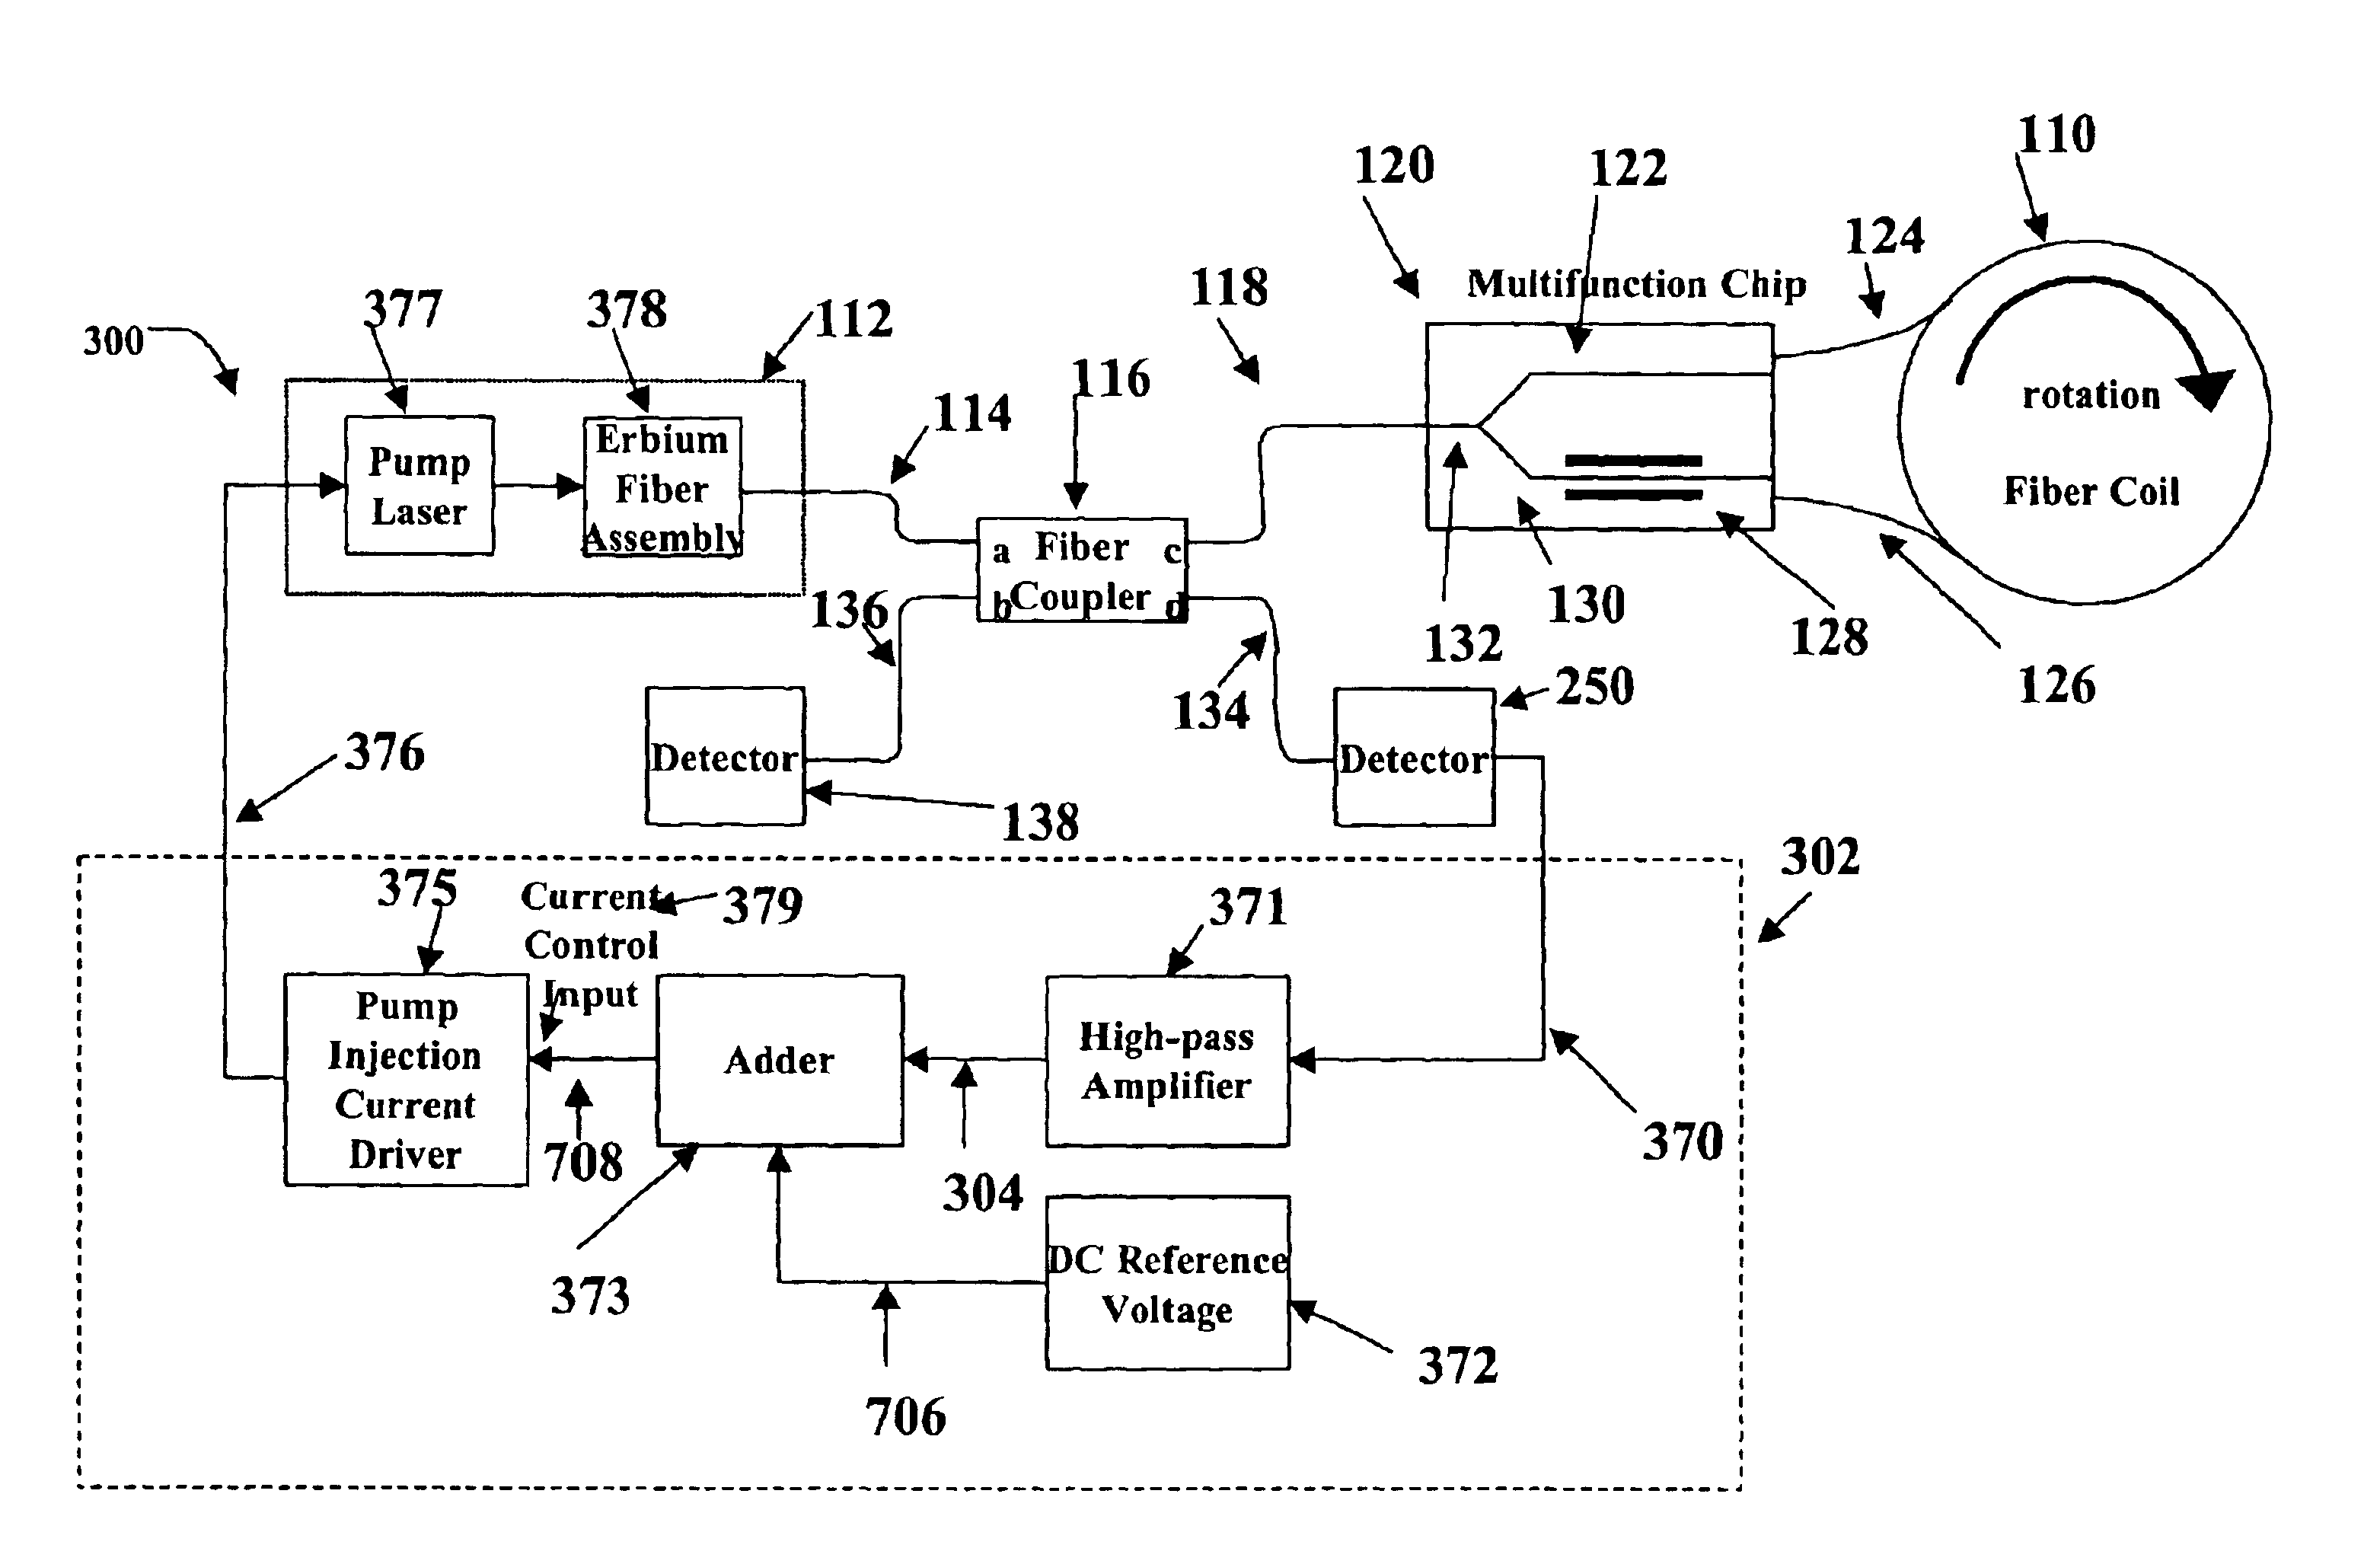 Relative intensity noise controller with maximum gain at frequencies at or above the bias modulation frequency or with second order feedback for fiber light sources